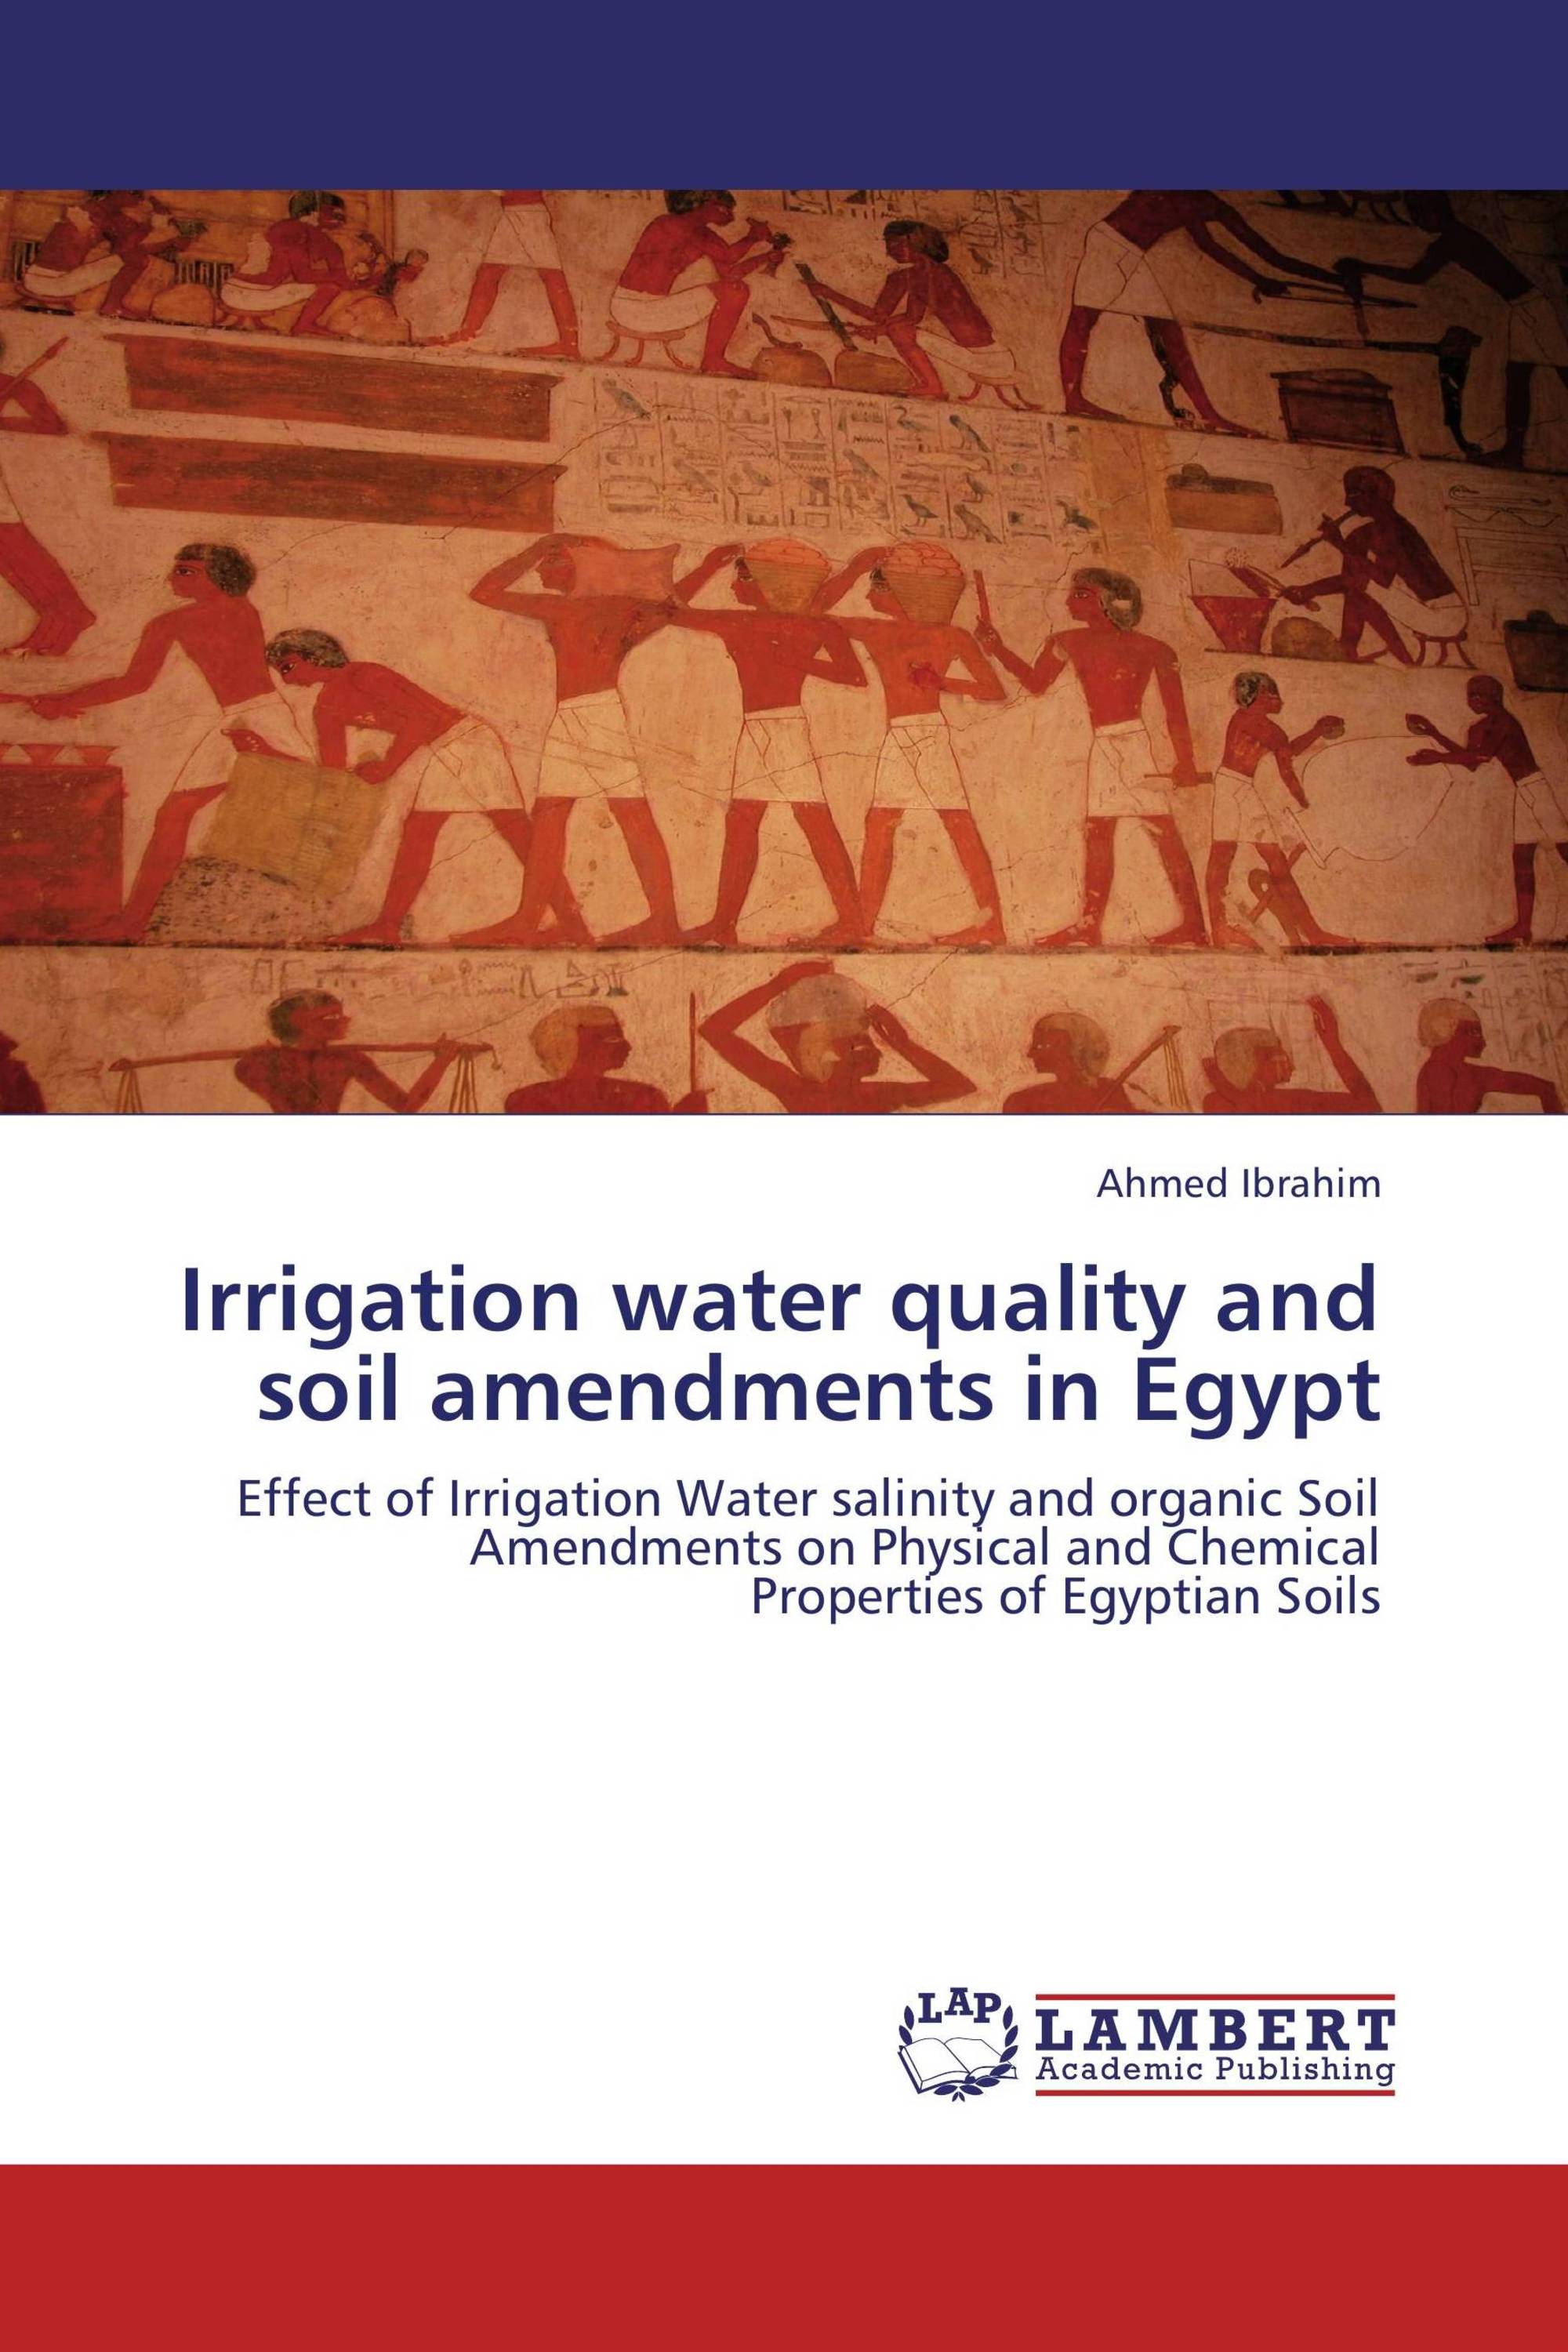 Irrigation water quality and soil amendments in Egypt